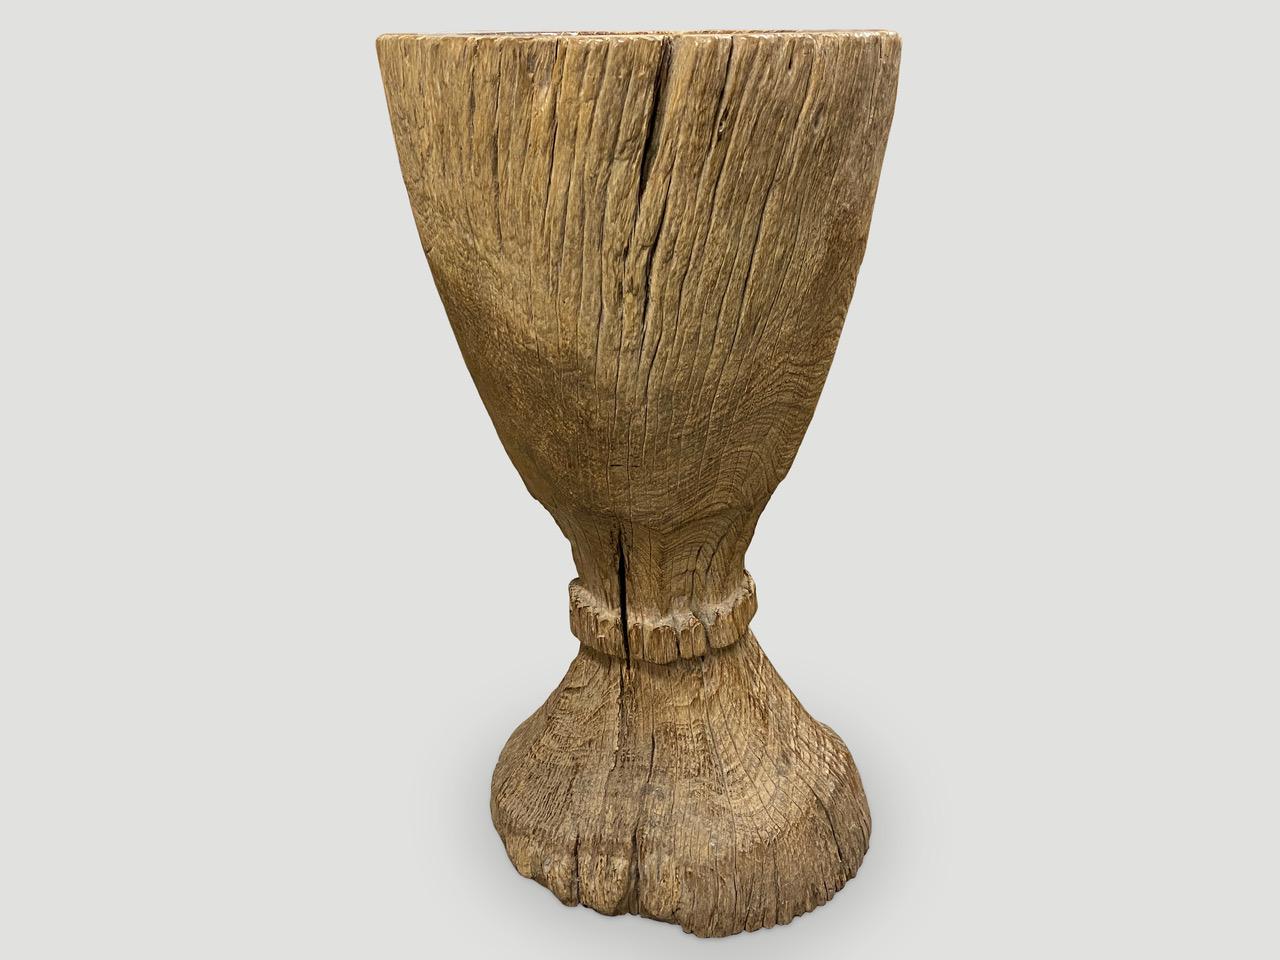 Antique rice pounder hand carved from a single teak root. Beautiful as a sculpture, holding towels or great as a champagne holder for parties. Also as a table base with a glass top.

This rice pounder was sourced in the spirit of Wabi-Sabi, a